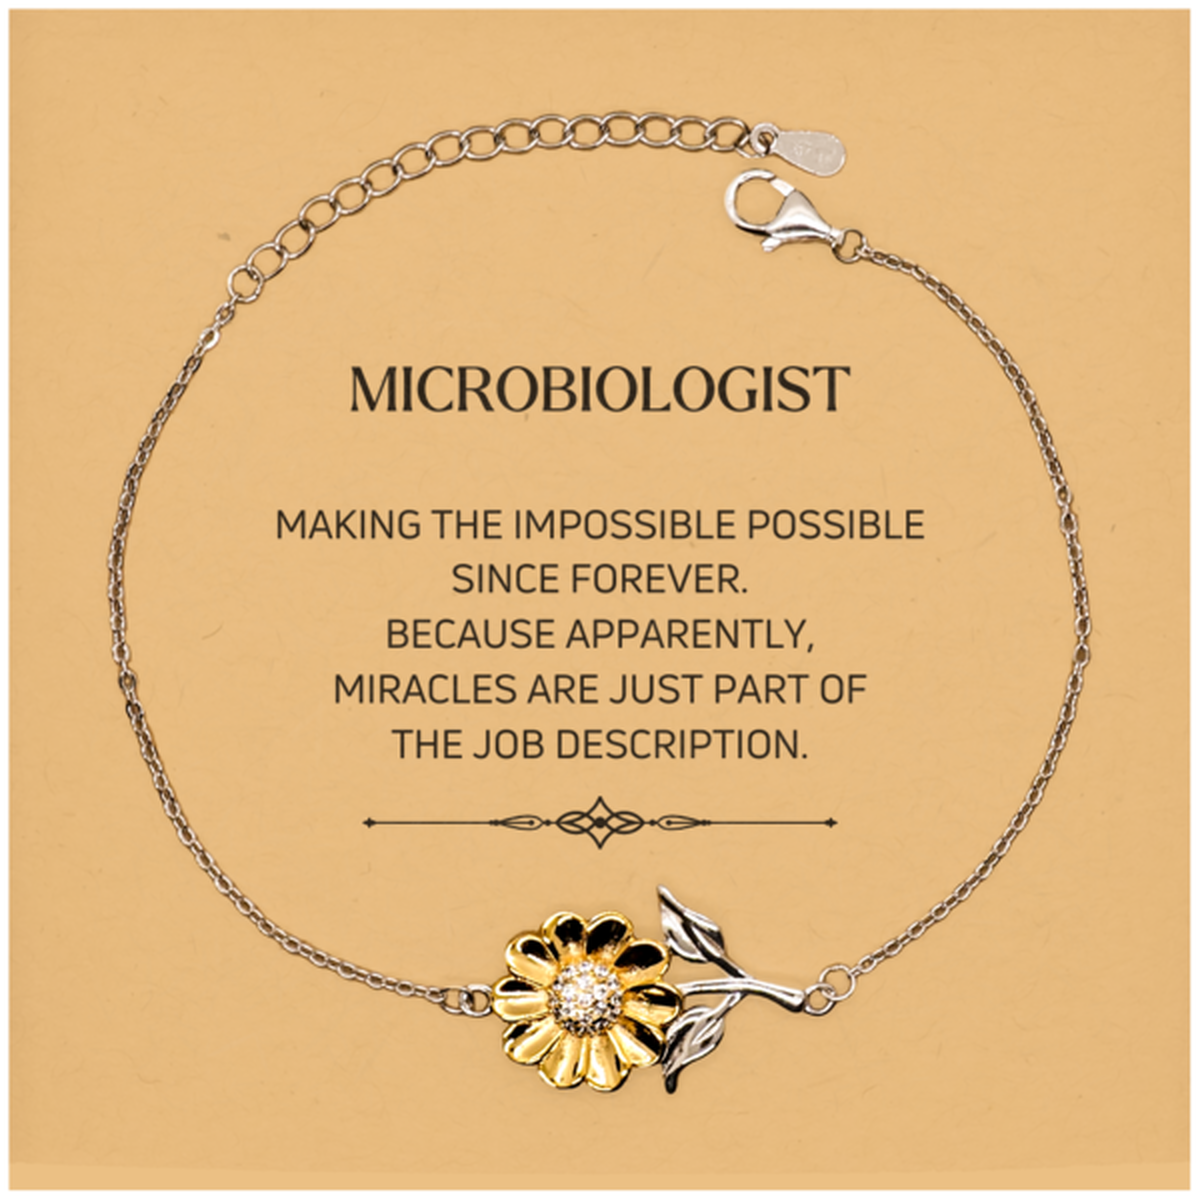 Funny Microbiologist Gifts, Miracles are just part of the job description, Inspirational Birthday Christmas Sunflower Bracelet For Microbiologist, Men, Women, Coworkers, Friends, Boss